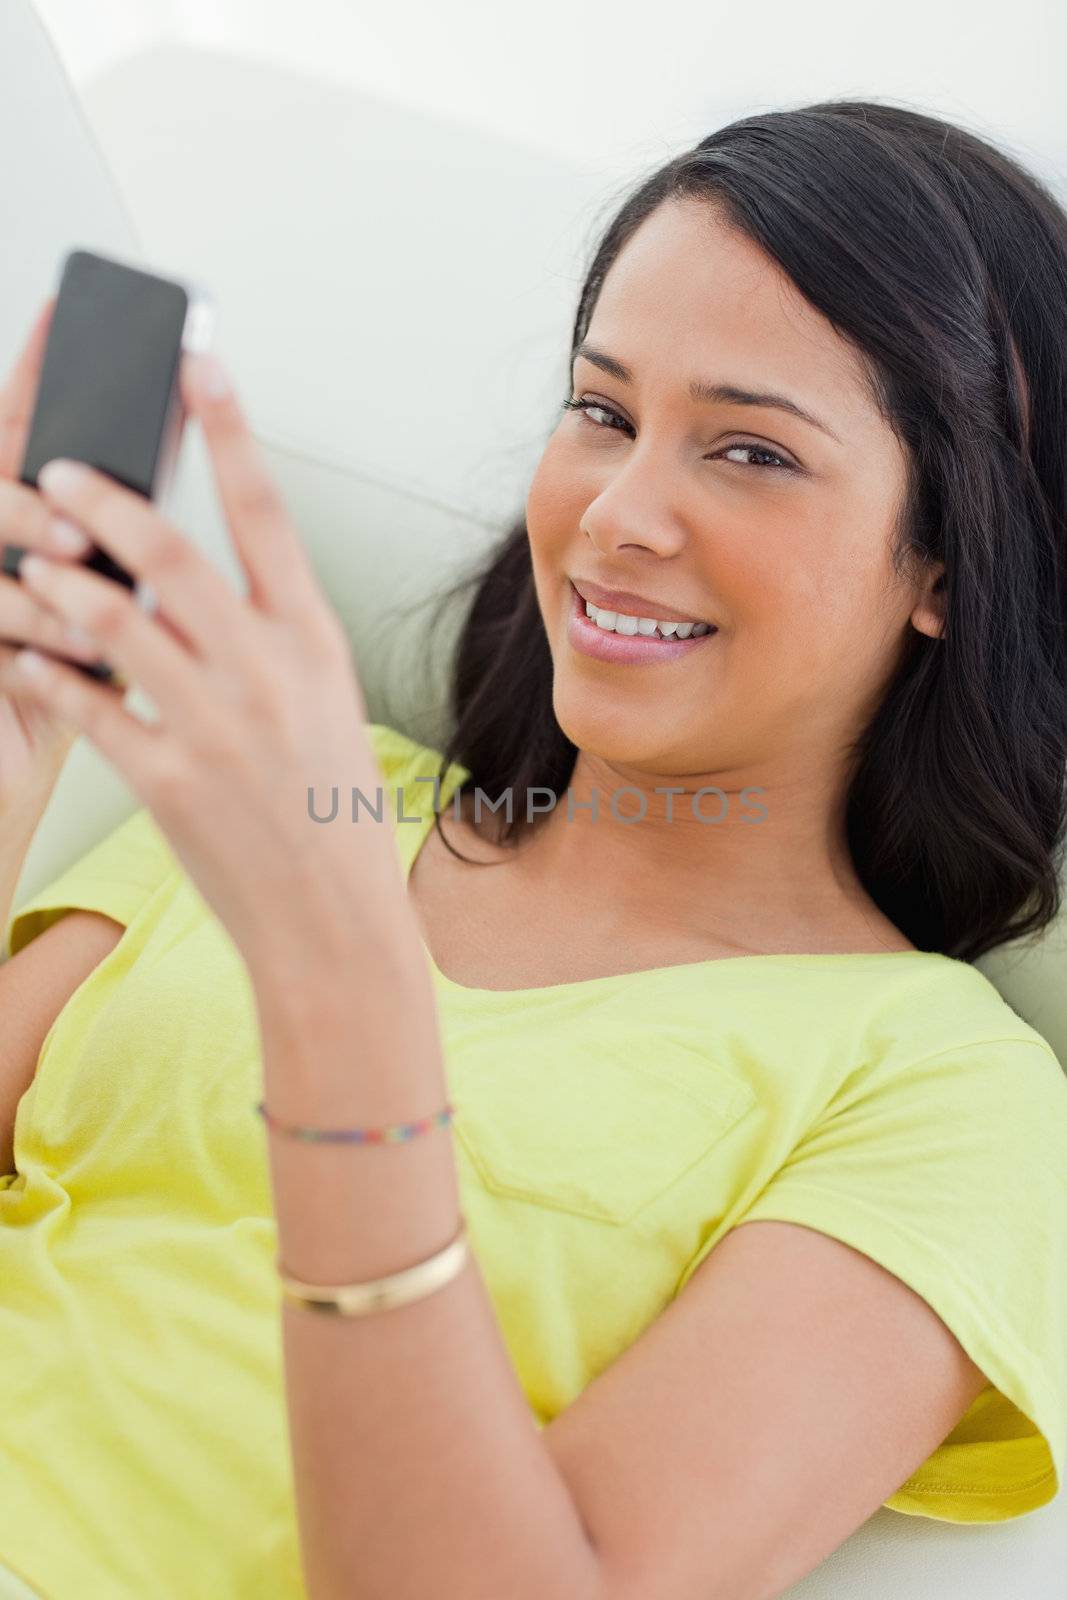 Portrait of a Latino holding her smartphone by Wavebreakmedia